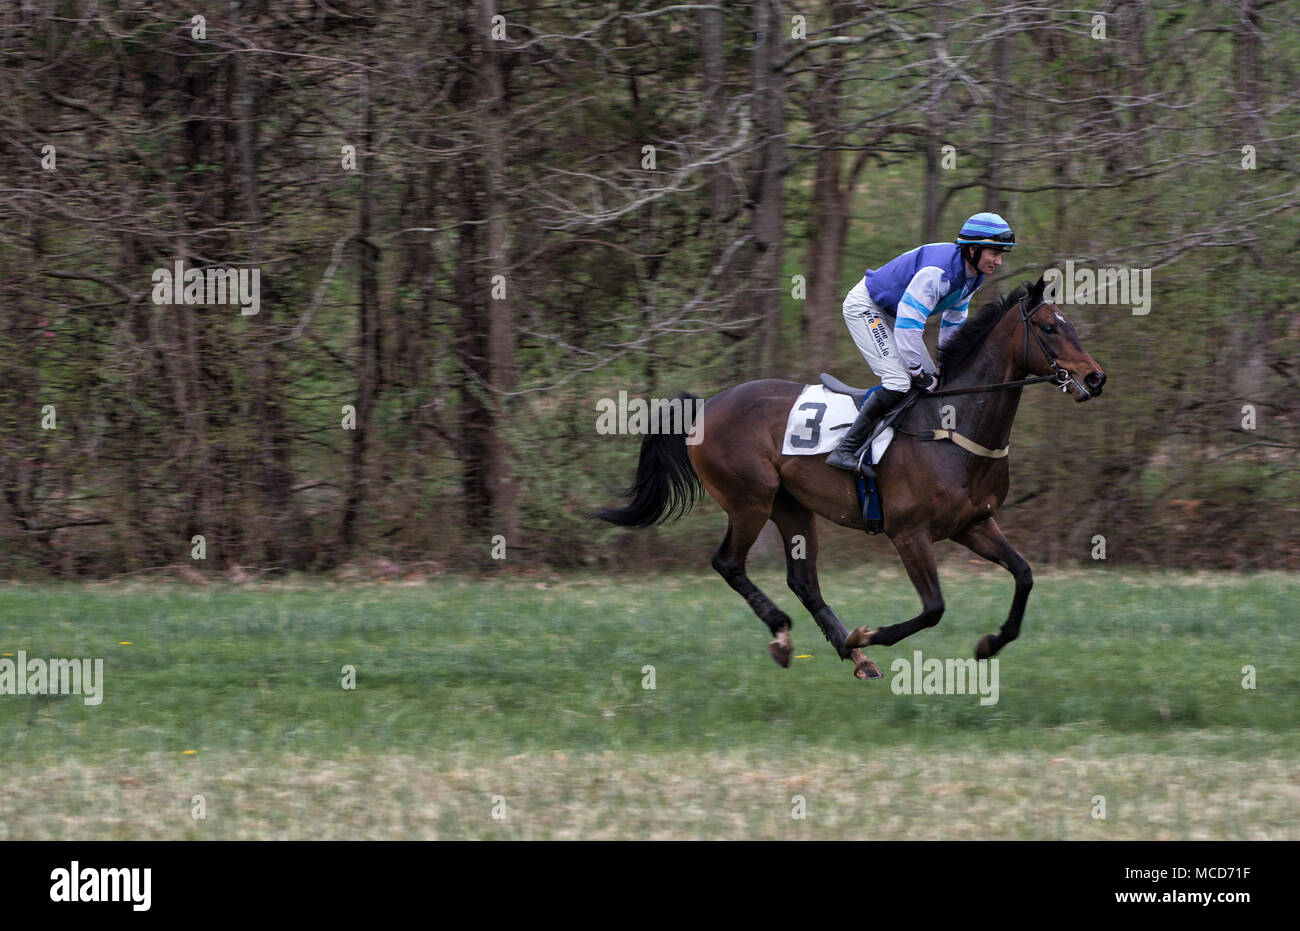 Leesburg, USA. 15th April 2018. UNITED STATES: April 15, 2018: Sean McDermott abroad Highly Prized from Great Britain during the Maiden Hurdle race for four-year-olds and up at the 52nd Annual Loudoun Hunt Point to Point races at Oatlands Plantation near Leesburg. (Photo by Douglas Graham/Loudoun Now) Stock Photo